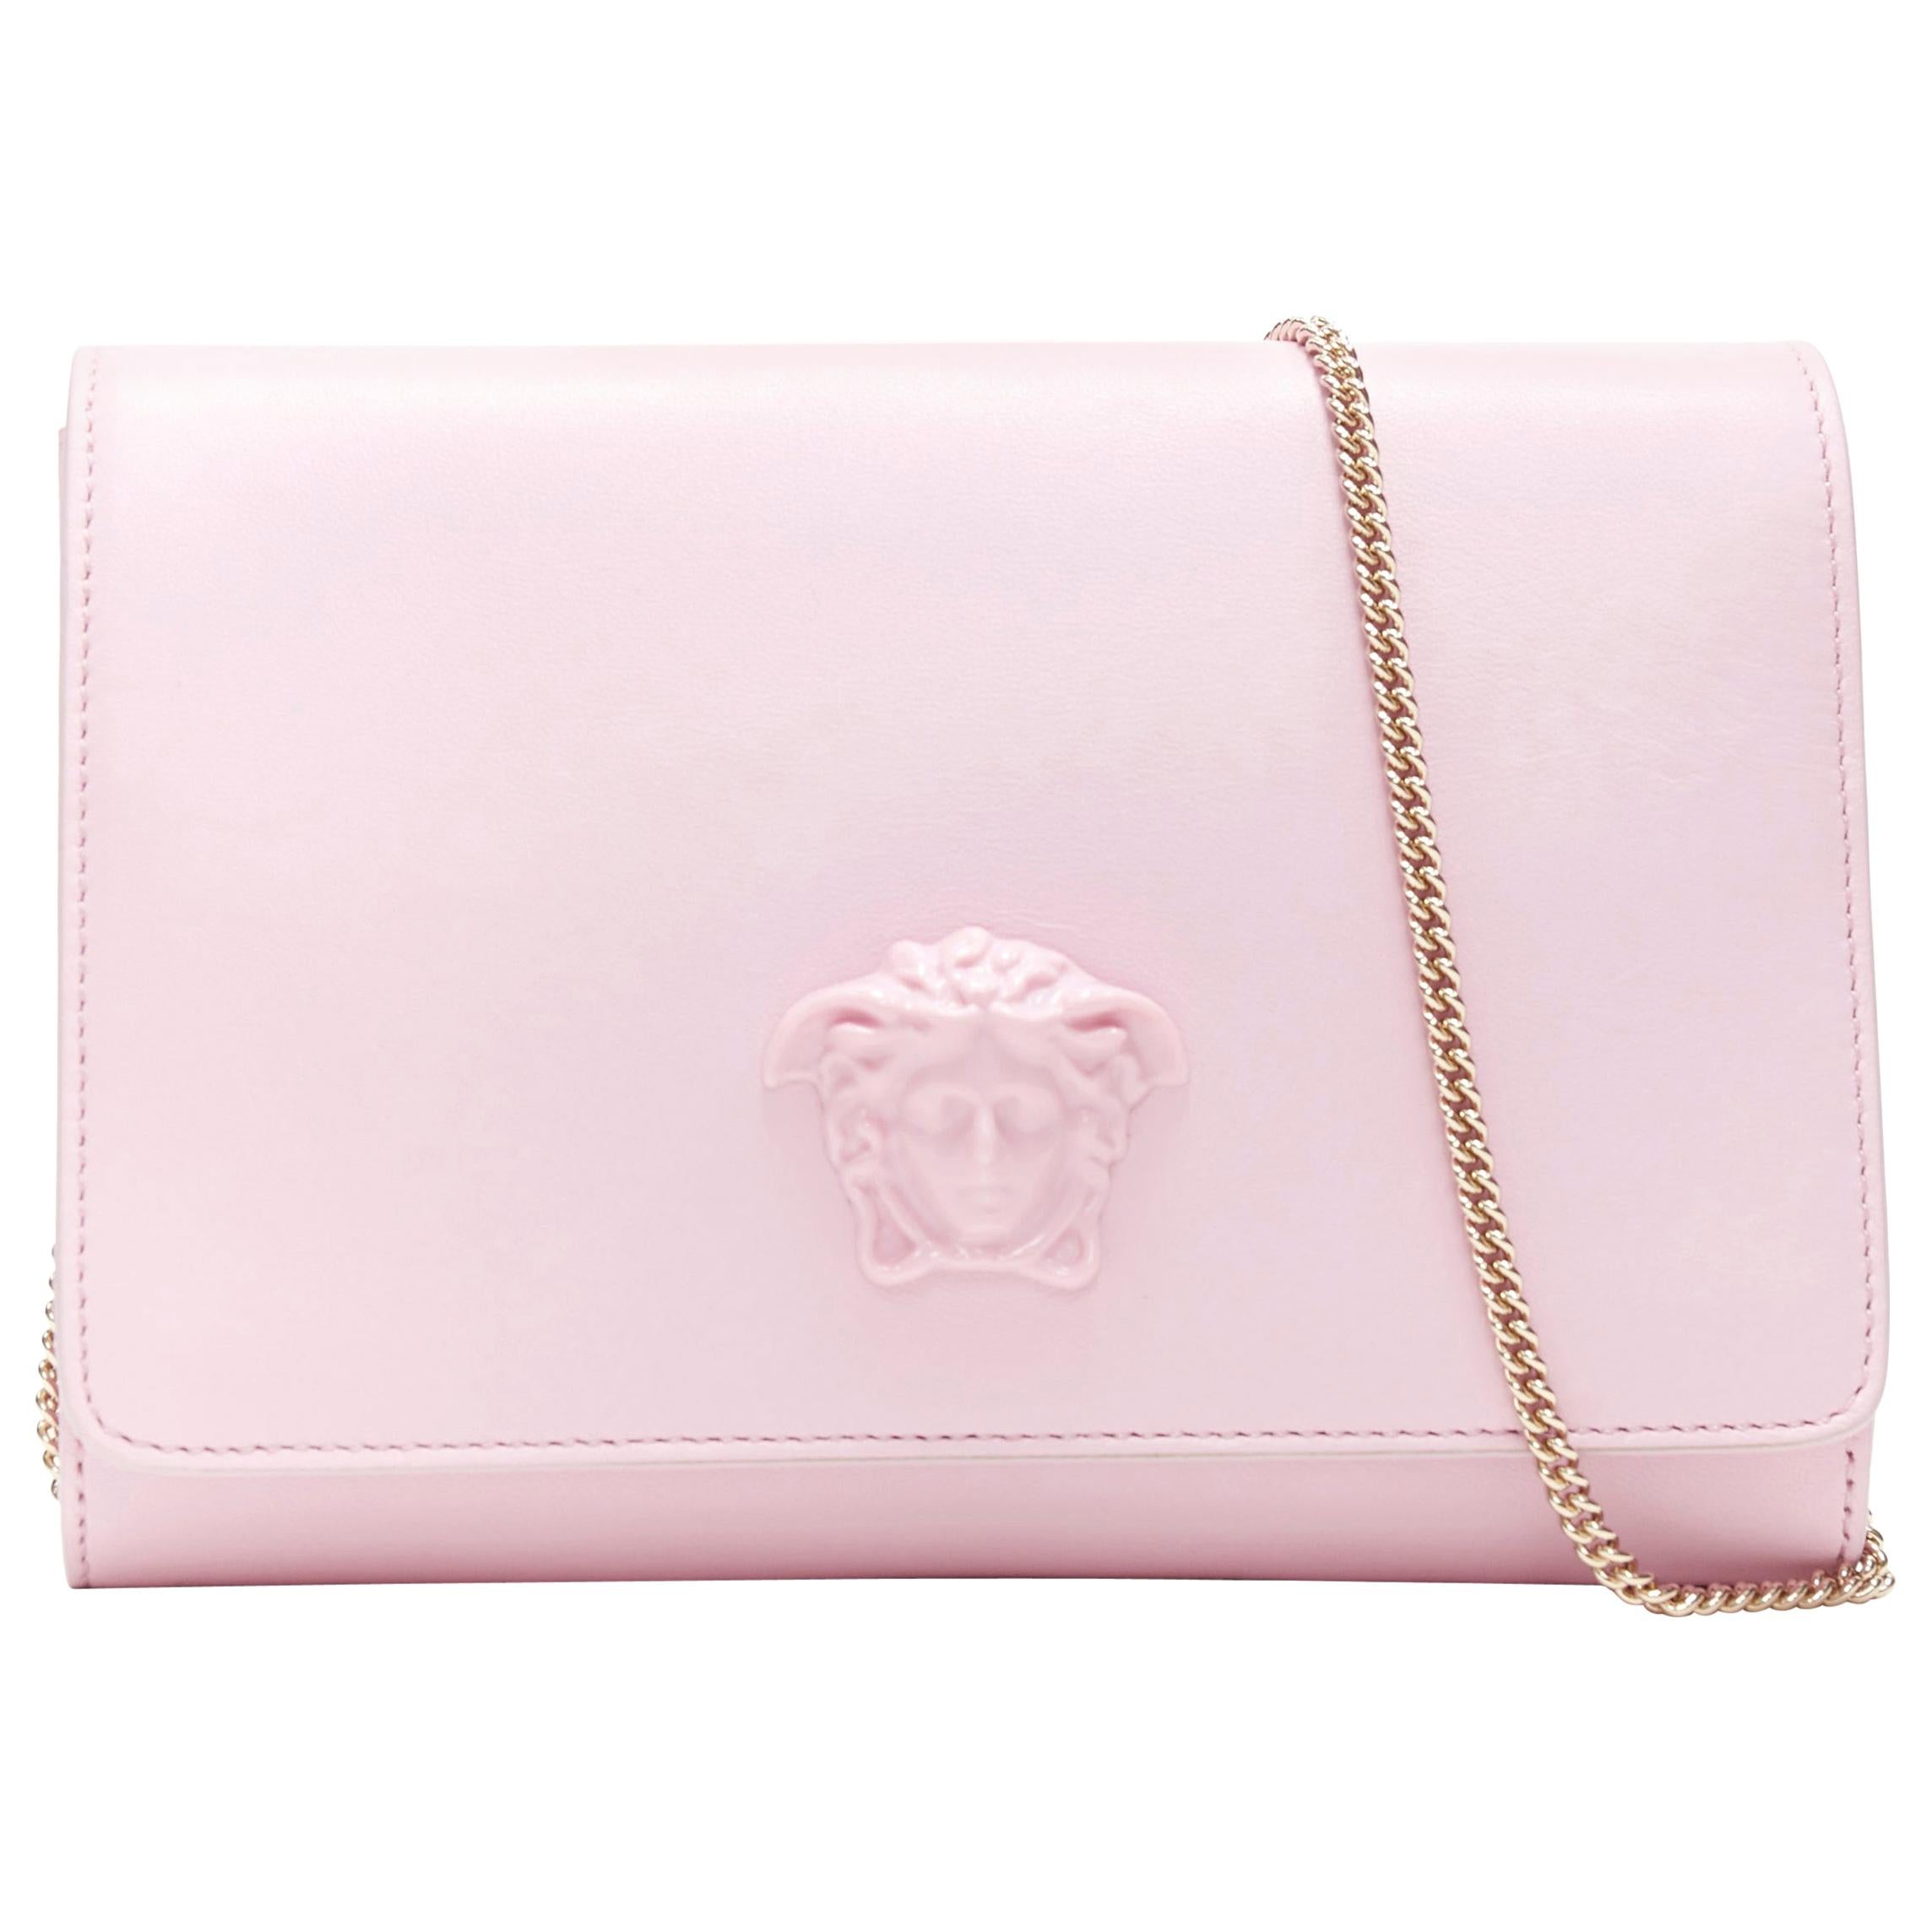 new VERSACE Palazzo Medusa light pink leather flap chain shoulder bag clutch